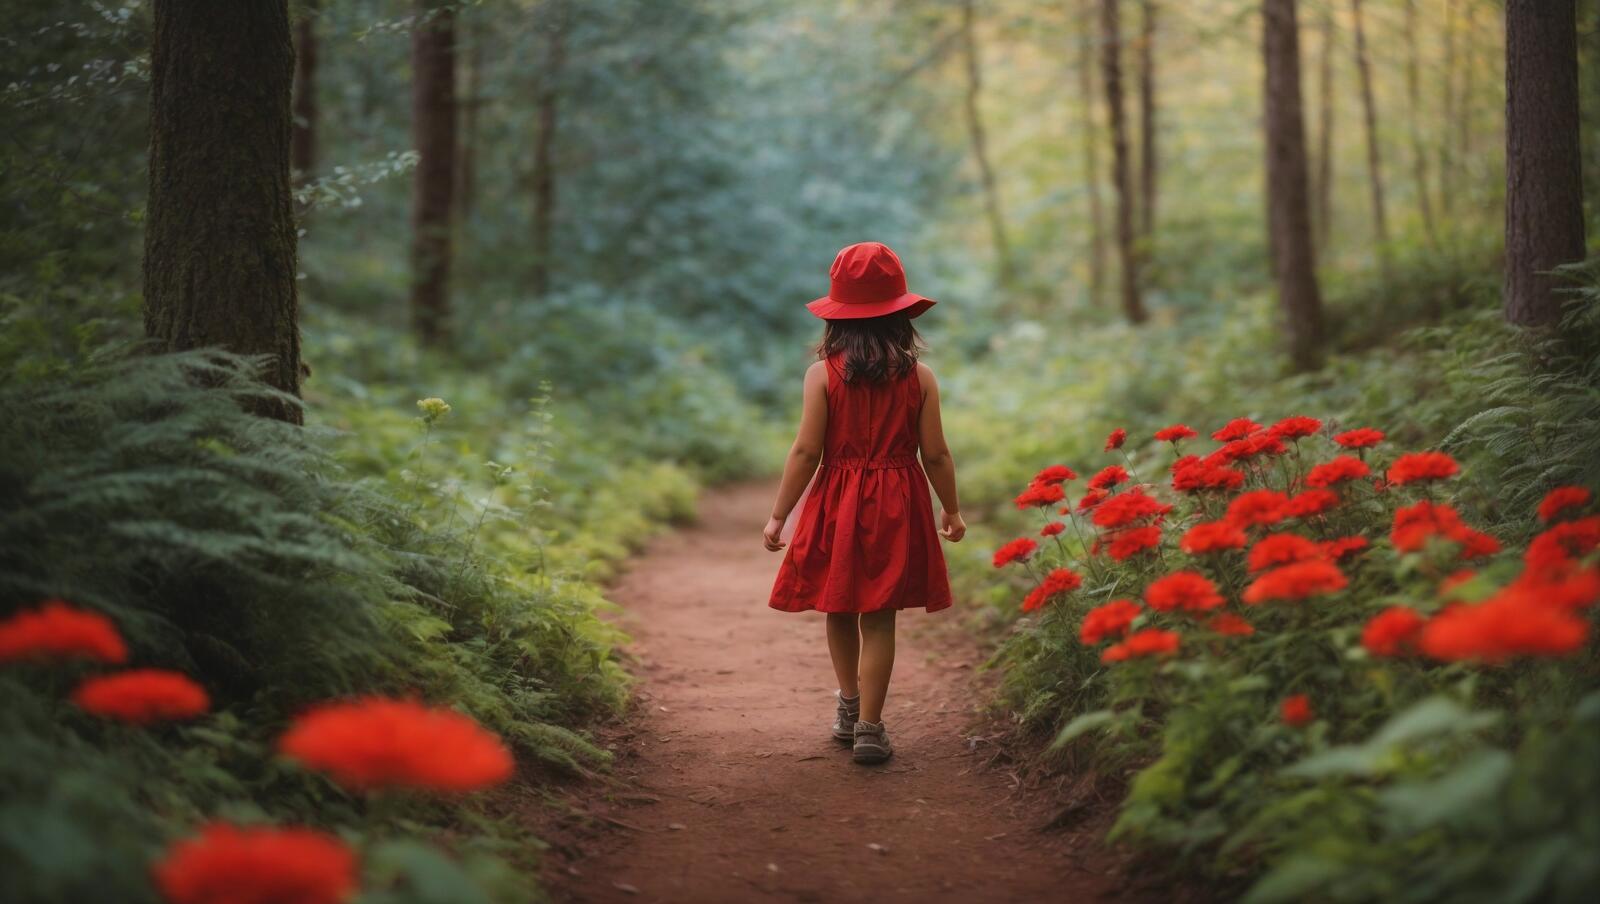 Free photo A little girl in a red dress is walking down a path with flowers in the background.